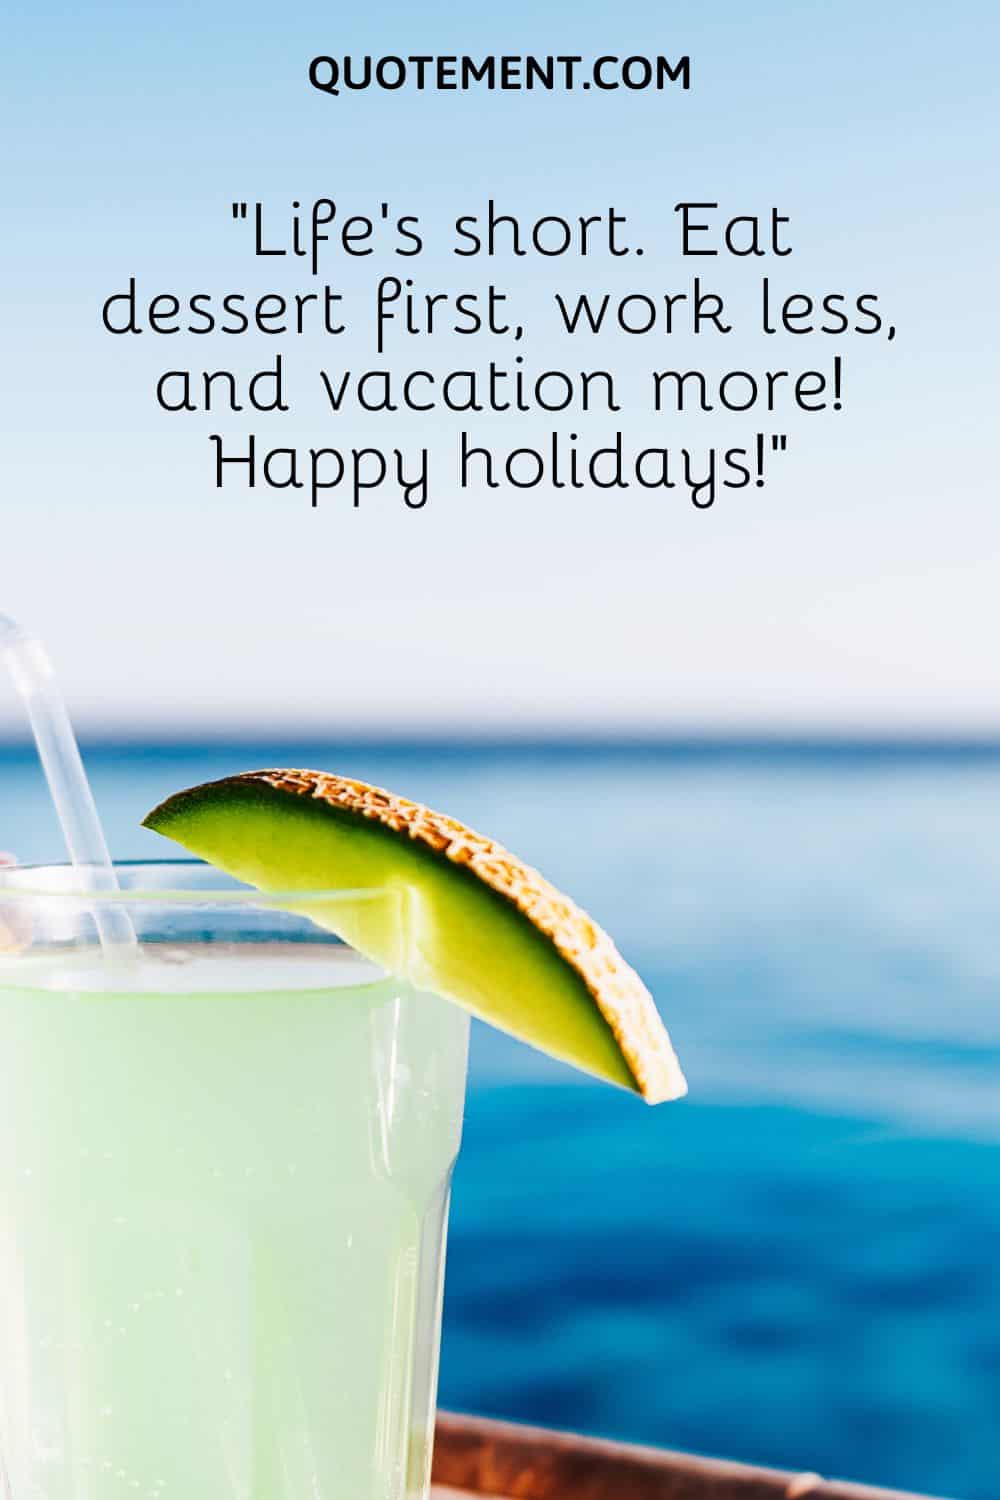 Life’s short. Eat dessert first, work less, and vacation more